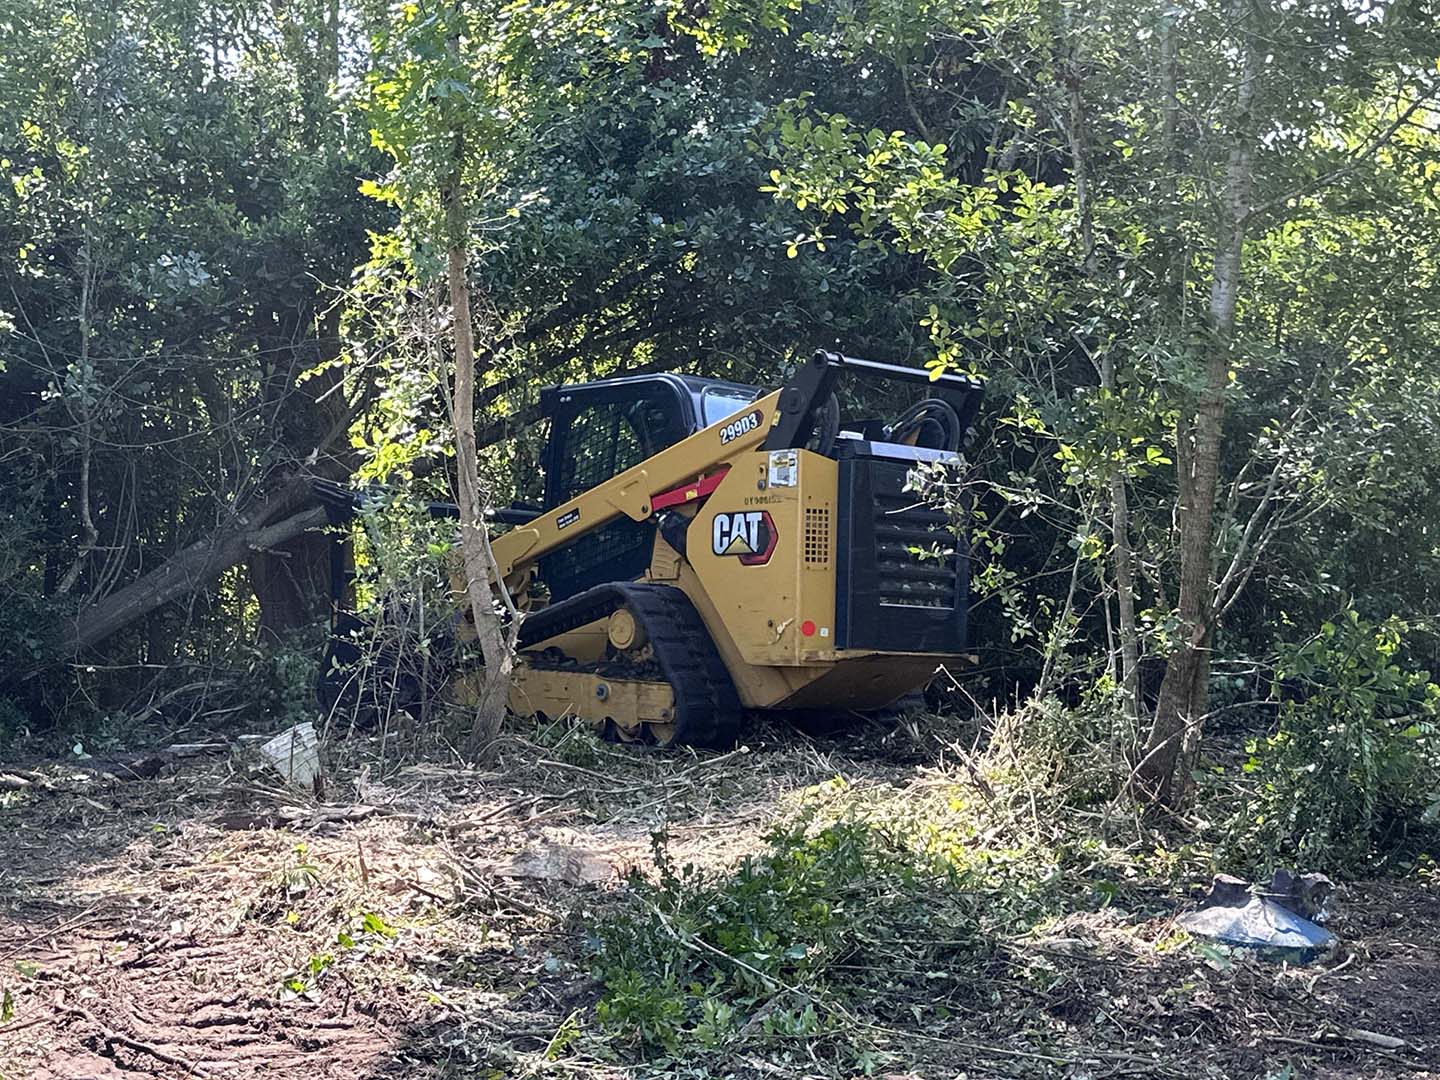 Photo of land clearing from a Panama City fence company